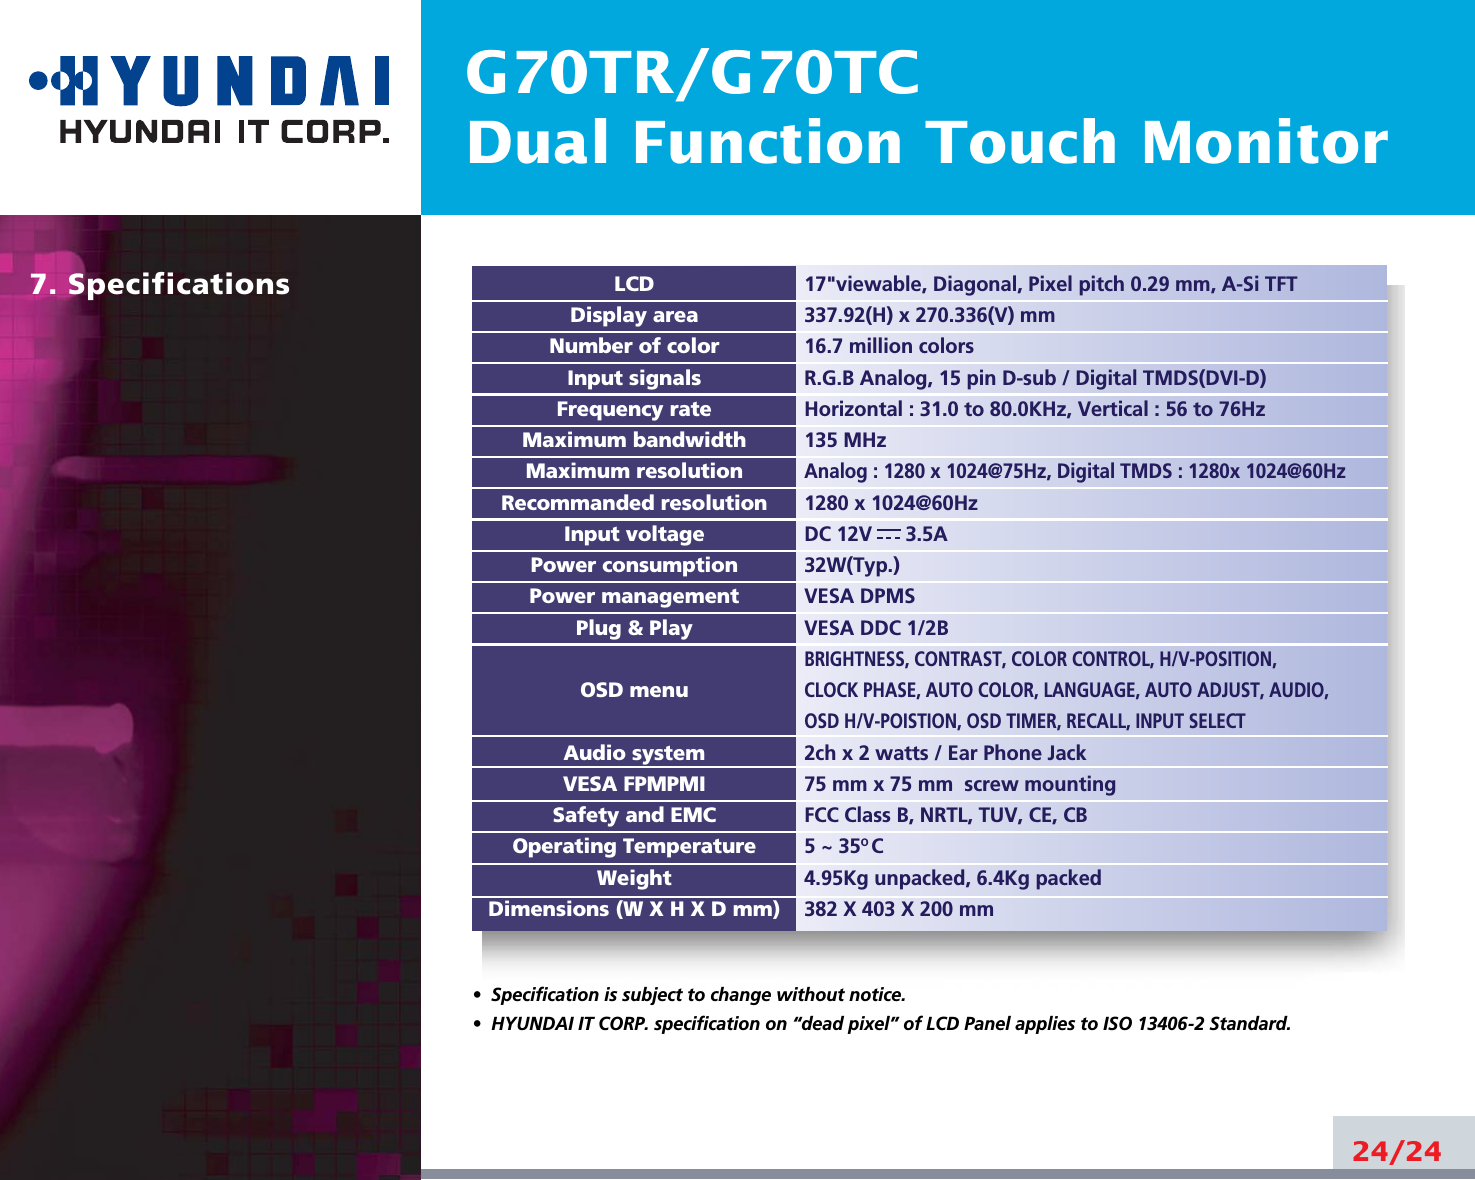 G70TR/G70TCDual Function Touch Monitor24/24LCDDisplay areaNumber of colorInput signalsFrequency rateMaximum bandwidthMaximum resolutionRecommanded resolutionInput voltagePower consumptionPower managementPlug &amp; PlayOSD menuAudio systemVESA FPMPMISafety and EMCOperating TemperatureWeightDimensions (W X H X D mm)•  Specification is subject to change without notice.•  HYUNDAI IT CORP. specification on “dead pixel” of LCD Panel applies to ISO 13406-2 Standard.7. Specifications17&quot;viewable, Diagonal, Pixel pitch 0.29 mm, A-Si TFT337.92(H) x 270.336(V) mm16.7 million colorsR.G.B Analog, 15 pin D-sub / Digital TMDS(DVI-D)Horizontal : 31.0 to 80.0KHz, Vertical : 56 to 76Hz135 MHzAnalog : 1280 x 1024@75Hz, Digital TMDS : 1280x 1024@60Hz1280 x 1024@60HzDC 12V      3.5A 32W(Typ.)VESA DPMSVESA DDC 1/2BBRIGHTNESS, CONTRAST, COLOR CONTROL, H/V-POSITION, CLOCK PHASE, AUTO COLOR, LANGUAGE, AUTO ADJUST, AUDIO,   OSD H/V-POISTION, OSD TIMER, RECALL, INPUT SELECT2ch x 2 watts / Ear Phone Jack75 mm x 75 mm  screw mountingFCC Class B, NRTL, TUV, CE, CB5 ~ 35O C4.95Kg unpacked, 6.4Kg packed382 X 403 X 200 mm